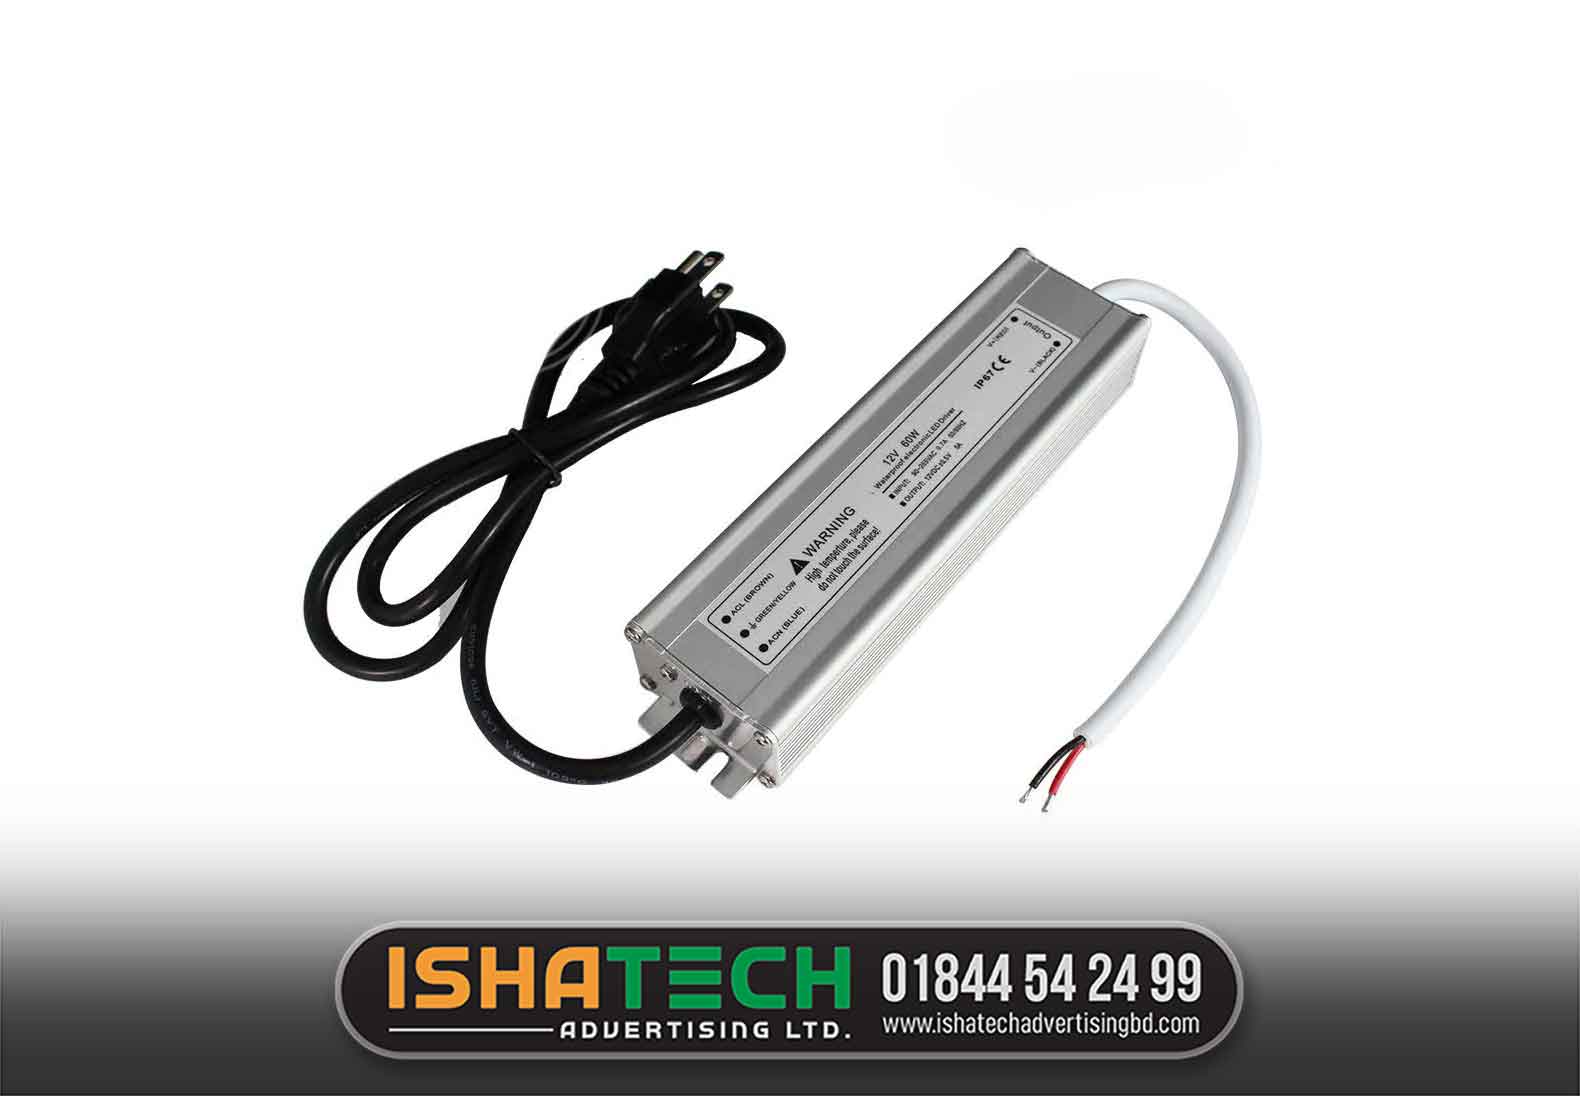 LED Driver 100 Watts Waterproof IP67 Power Supply Transformer Adapter，90V-265V AC to 12V DC Low Voltage Output for LED Light, Computer Project, Outdoor Light and Any 12V DC led Lights price 250 taka bdt.